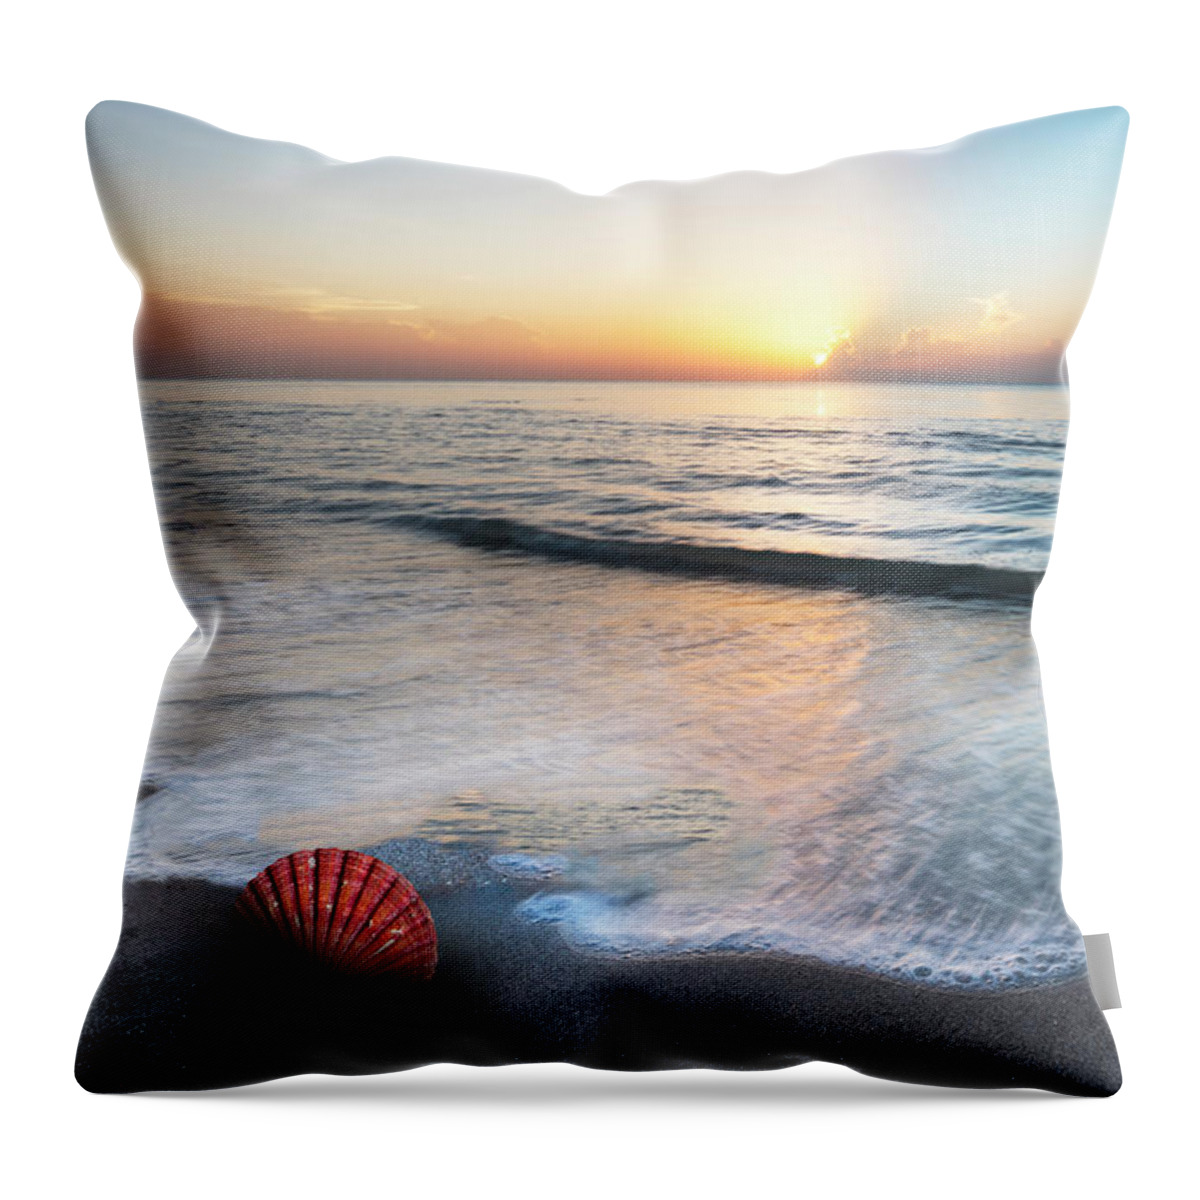 Clouds Throw Pillow featuring the photograph Waves and Shells by Debra and Dave Vanderlaan